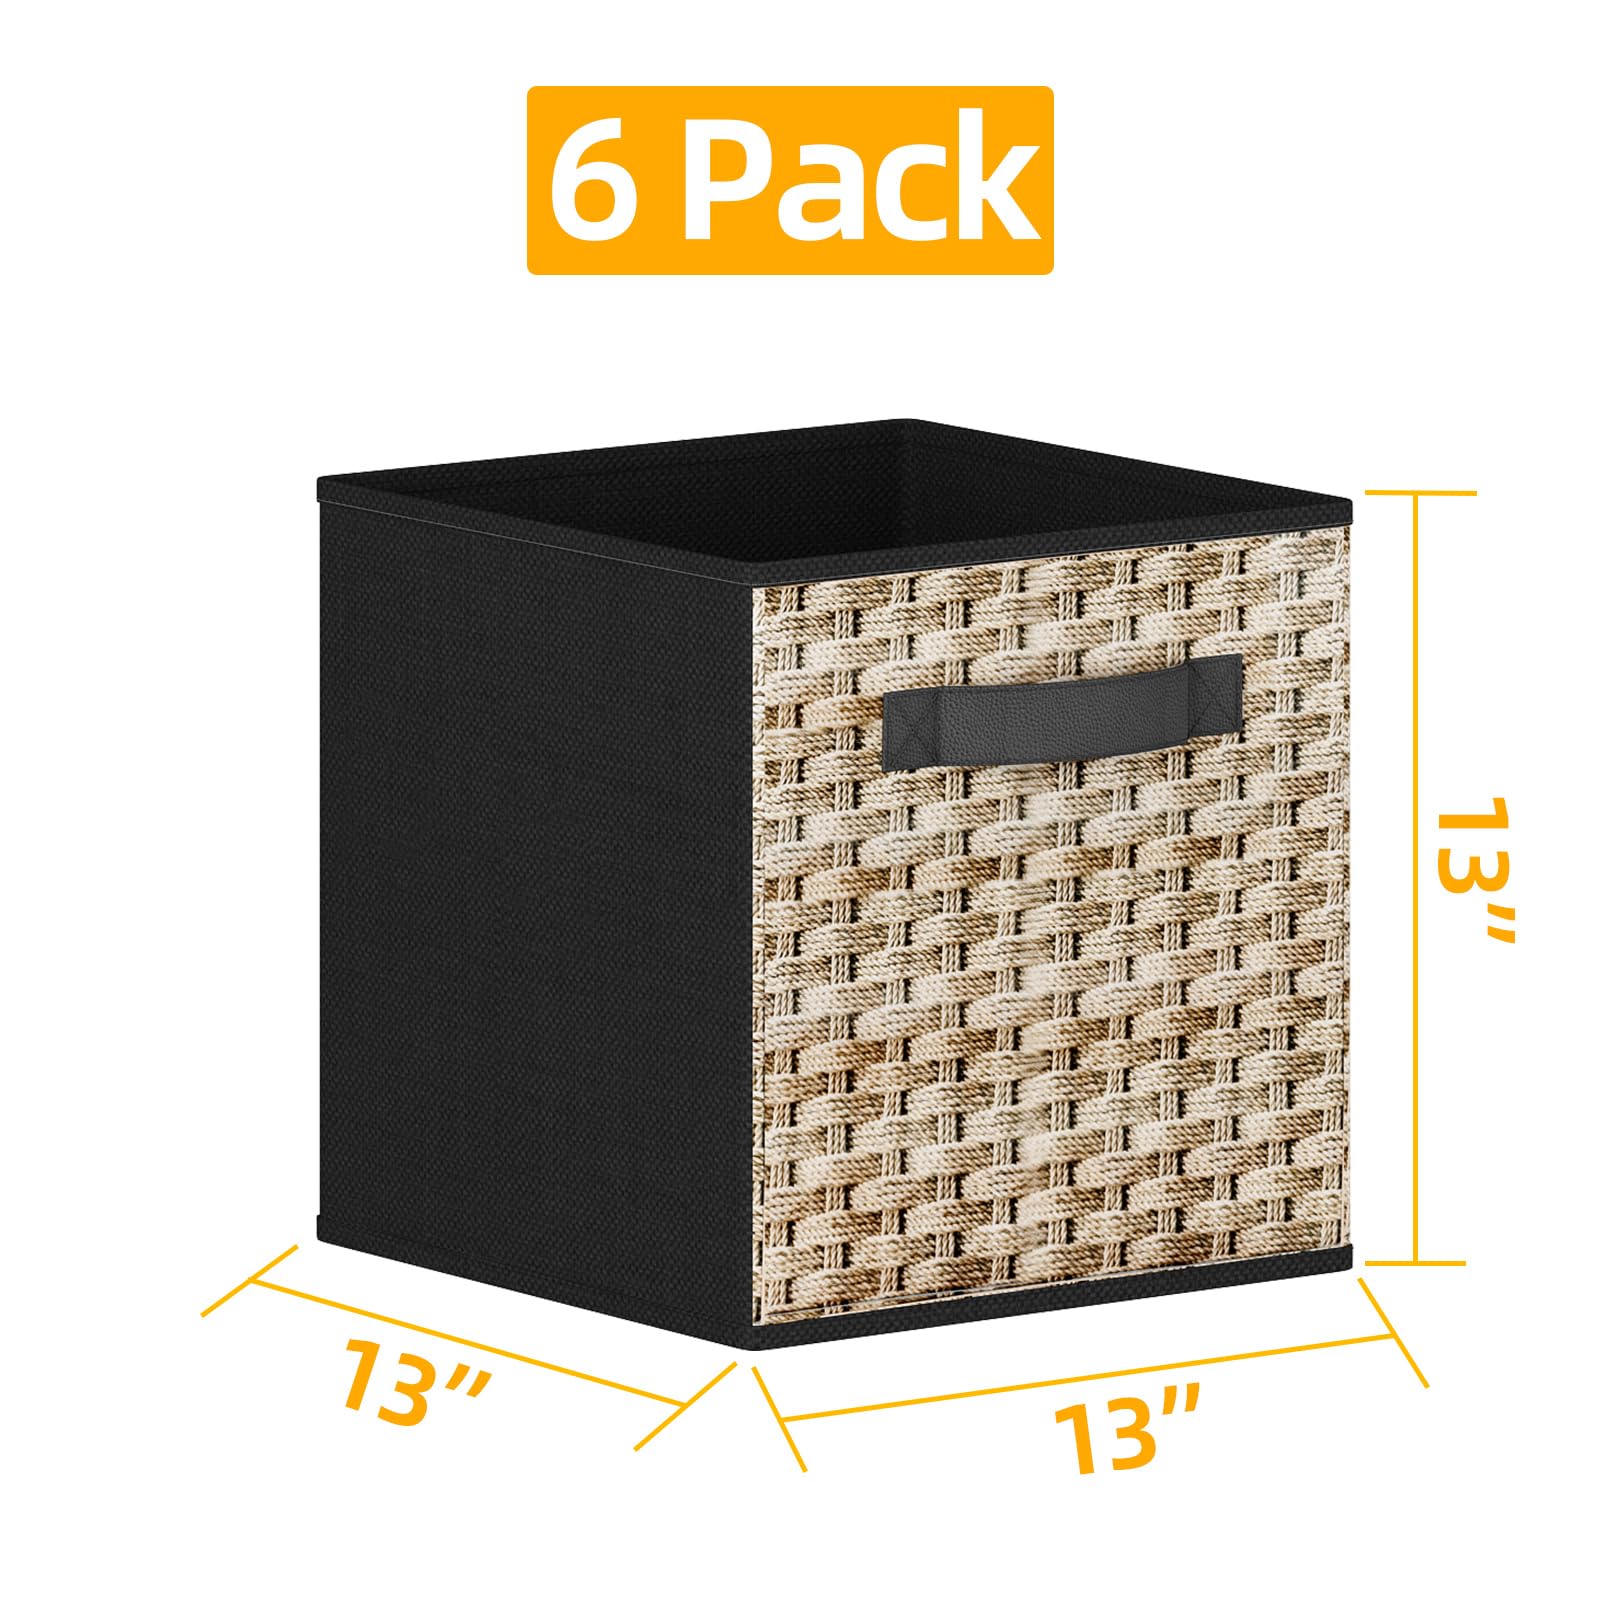 GILLAS 6 Pack Fabric Storage Cubes. 13 Inch Cube Storage Bins with Handle, Foldable Closet Organizers for Shelves, Storage Baskets for Shelves, Black, Large